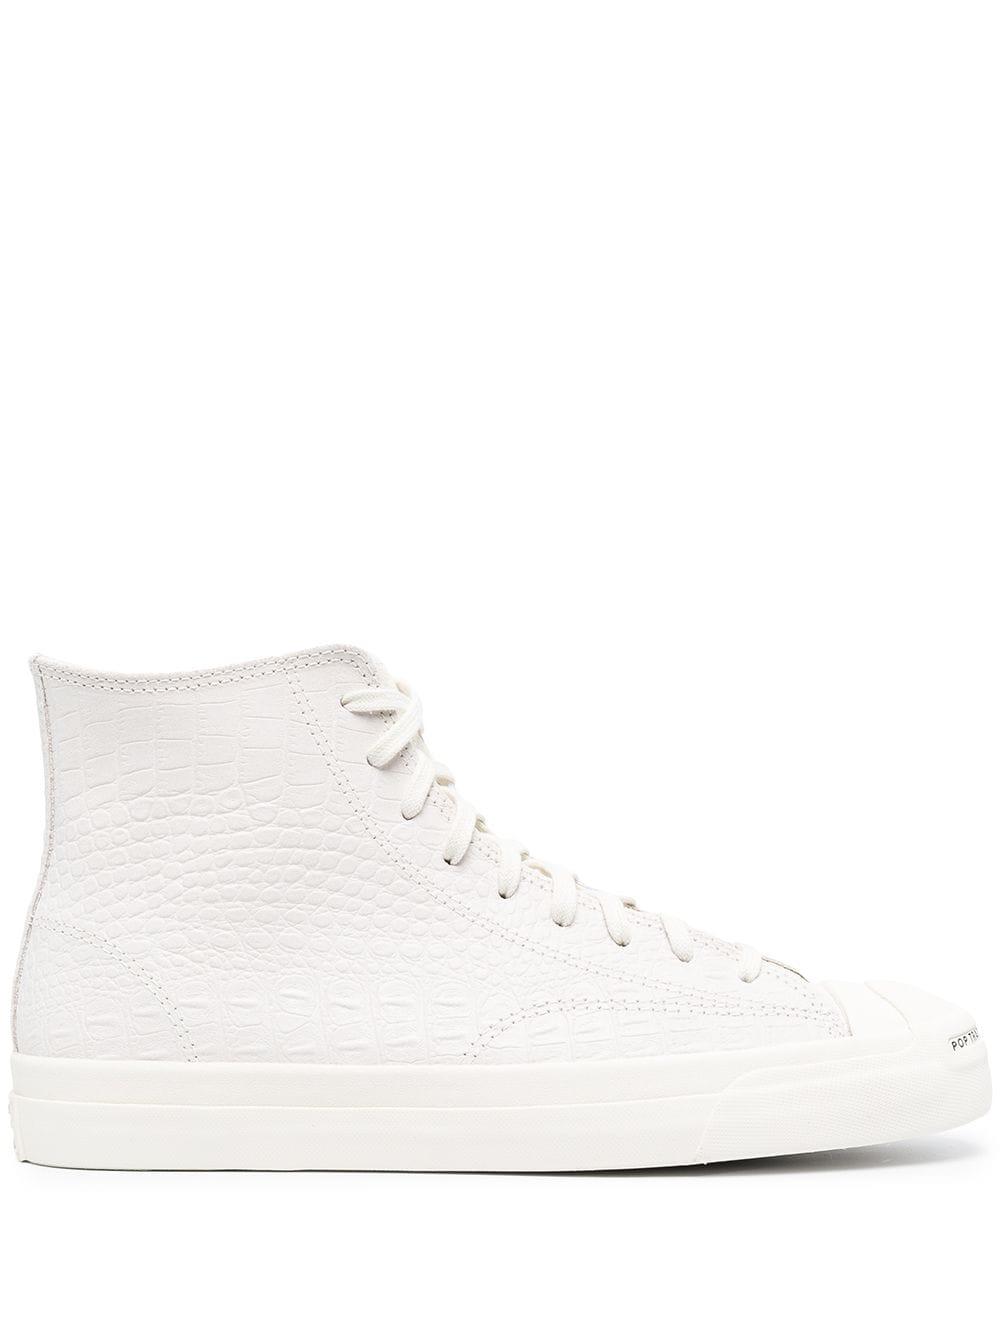 Converse Crocodile-effect High-top Sneakers in White for Men | Lyst